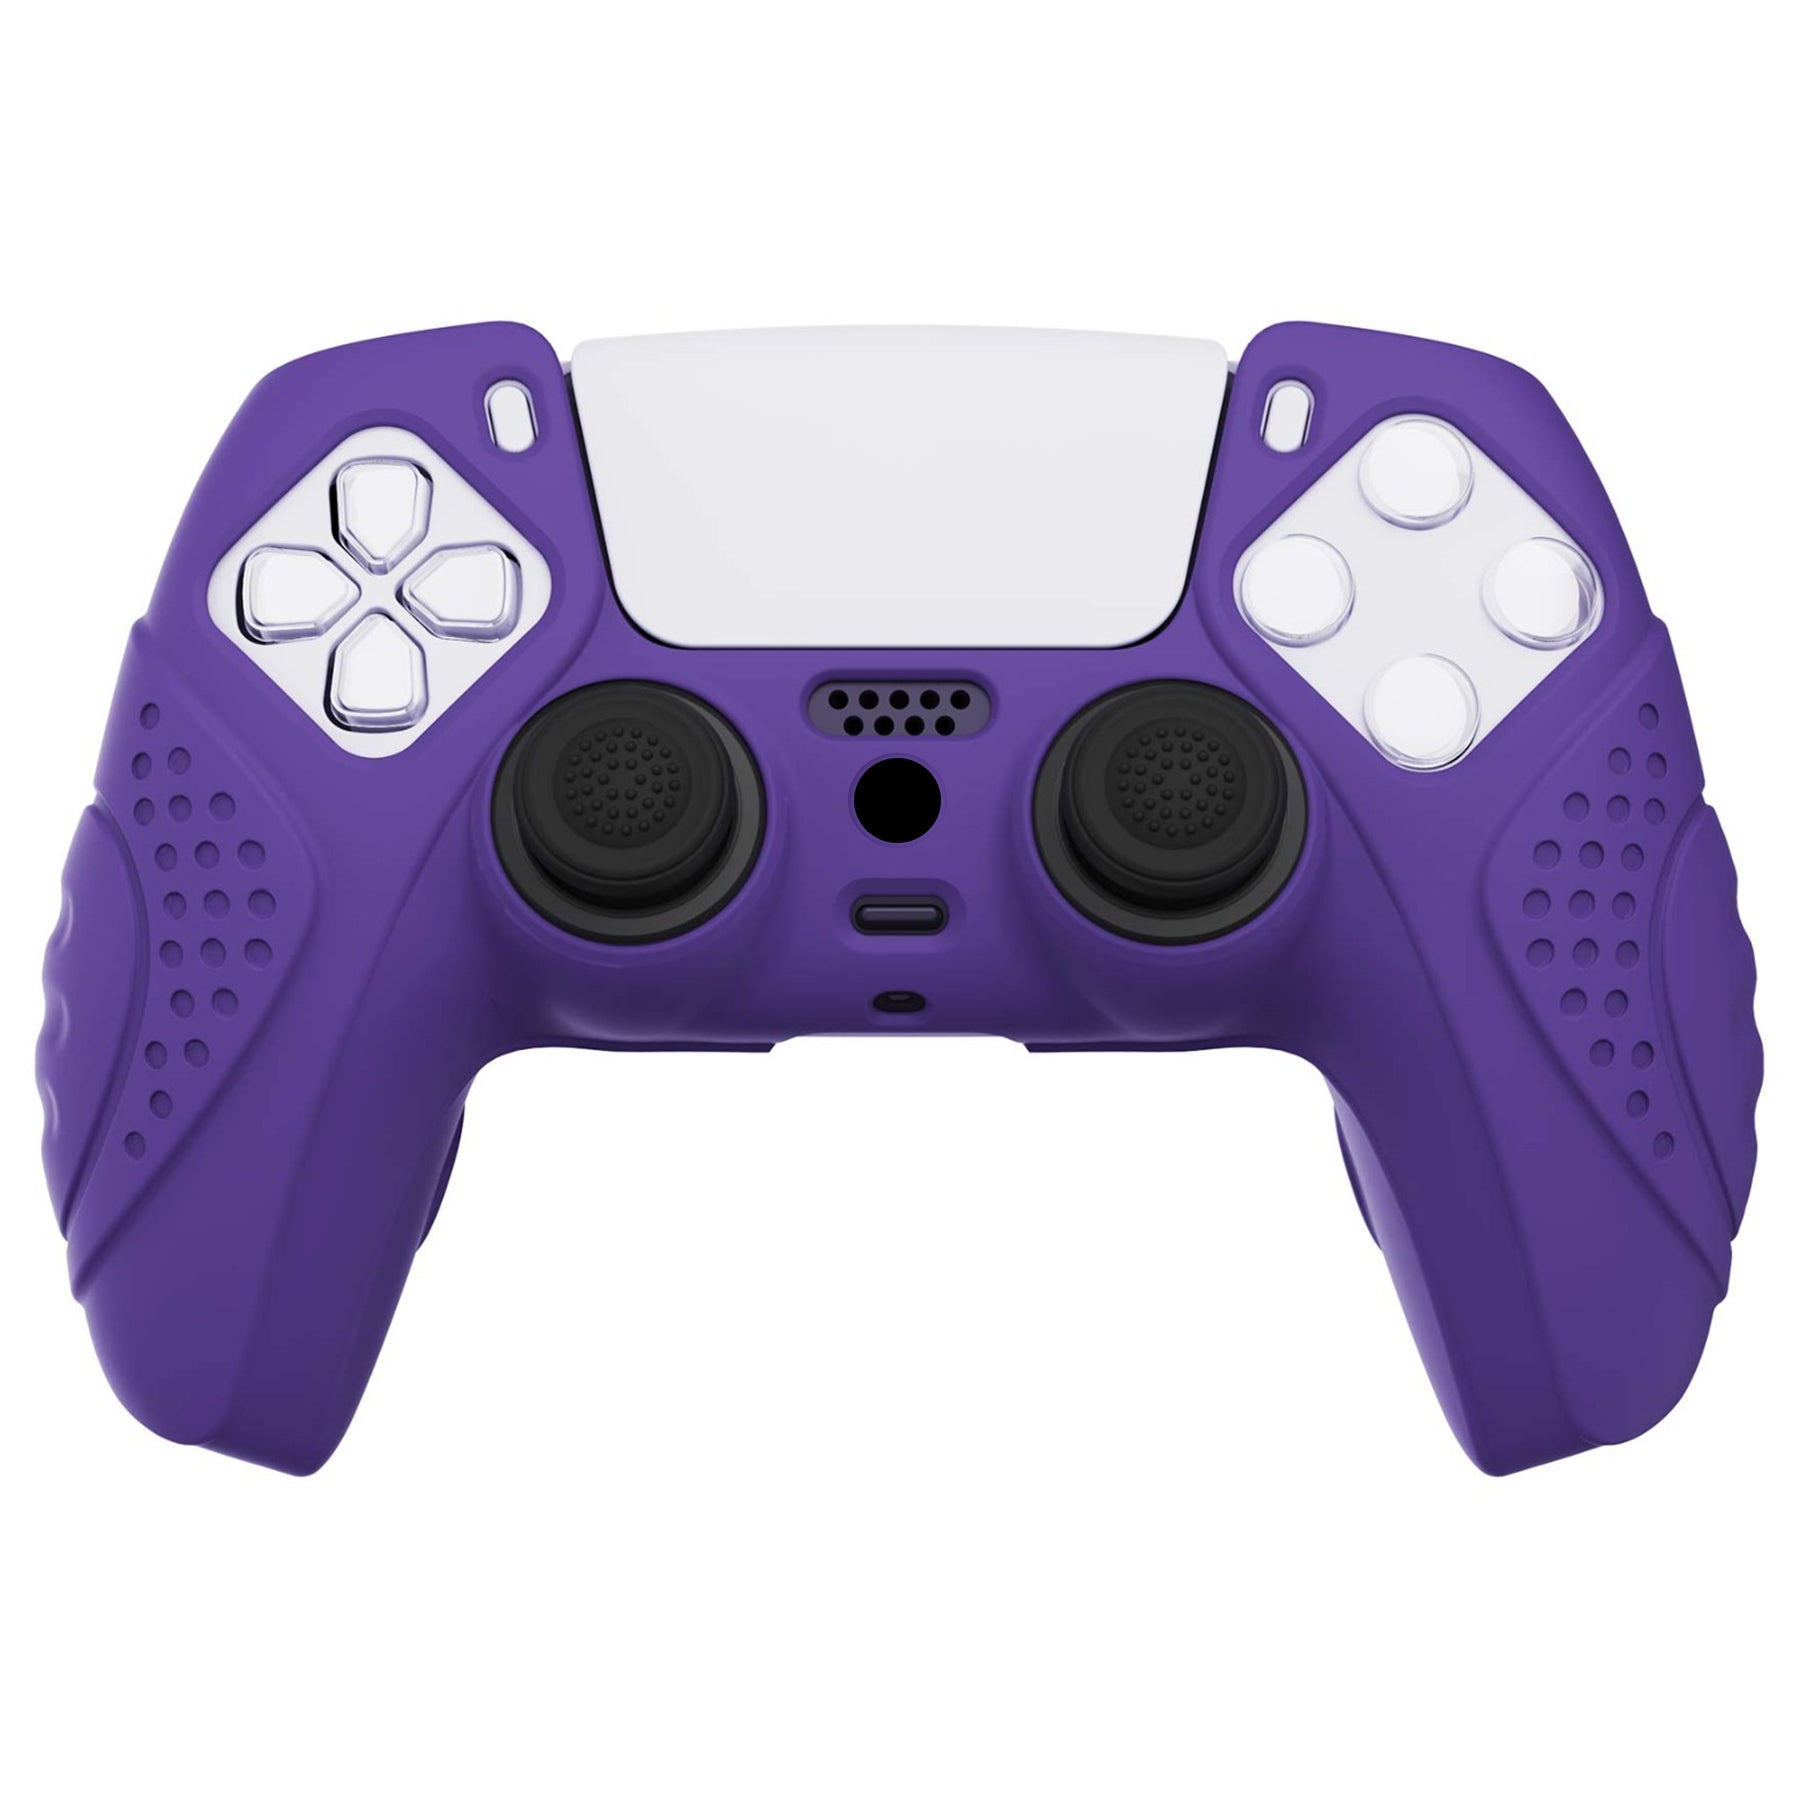 PlayVital Guardian Edition Anti-Slip Silicone Cover Skin with Thumb Grip Caps for PS5 Wireless Controller - Purple - YHPF007 PlayVital